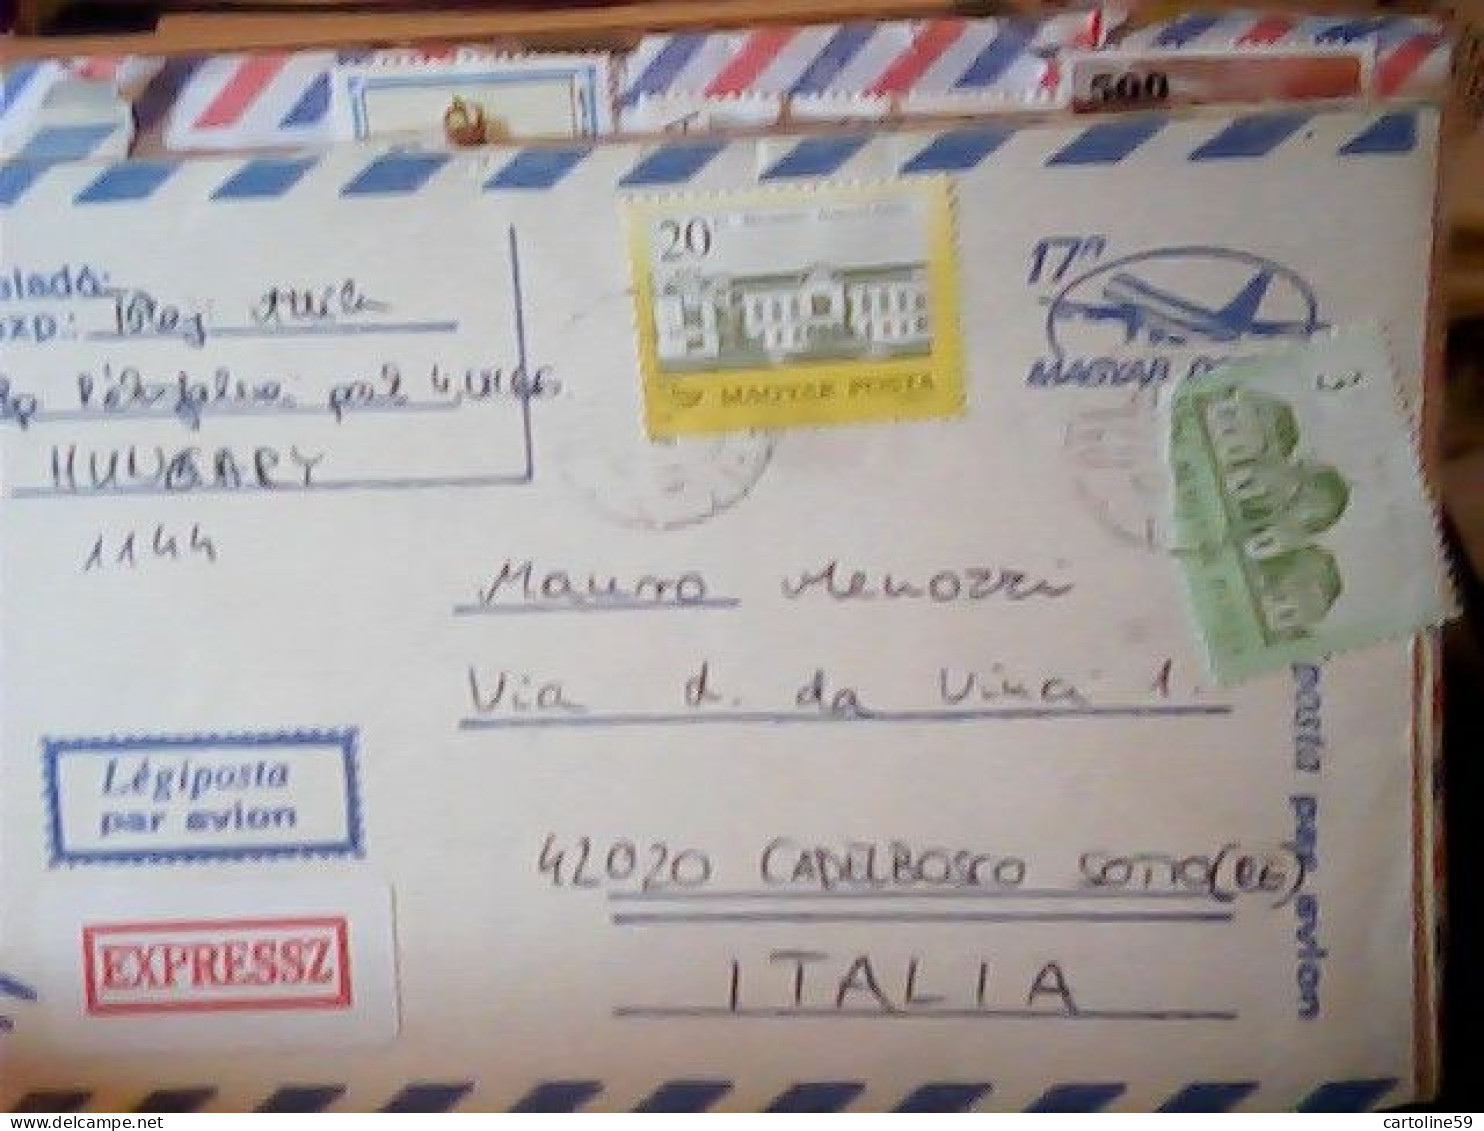 2 BUSTE UNGHERIA (HUNGERY )- MAGYAR 1990 Airmail  3 5 8 10 20 FT JR5043 - Covers & Documents